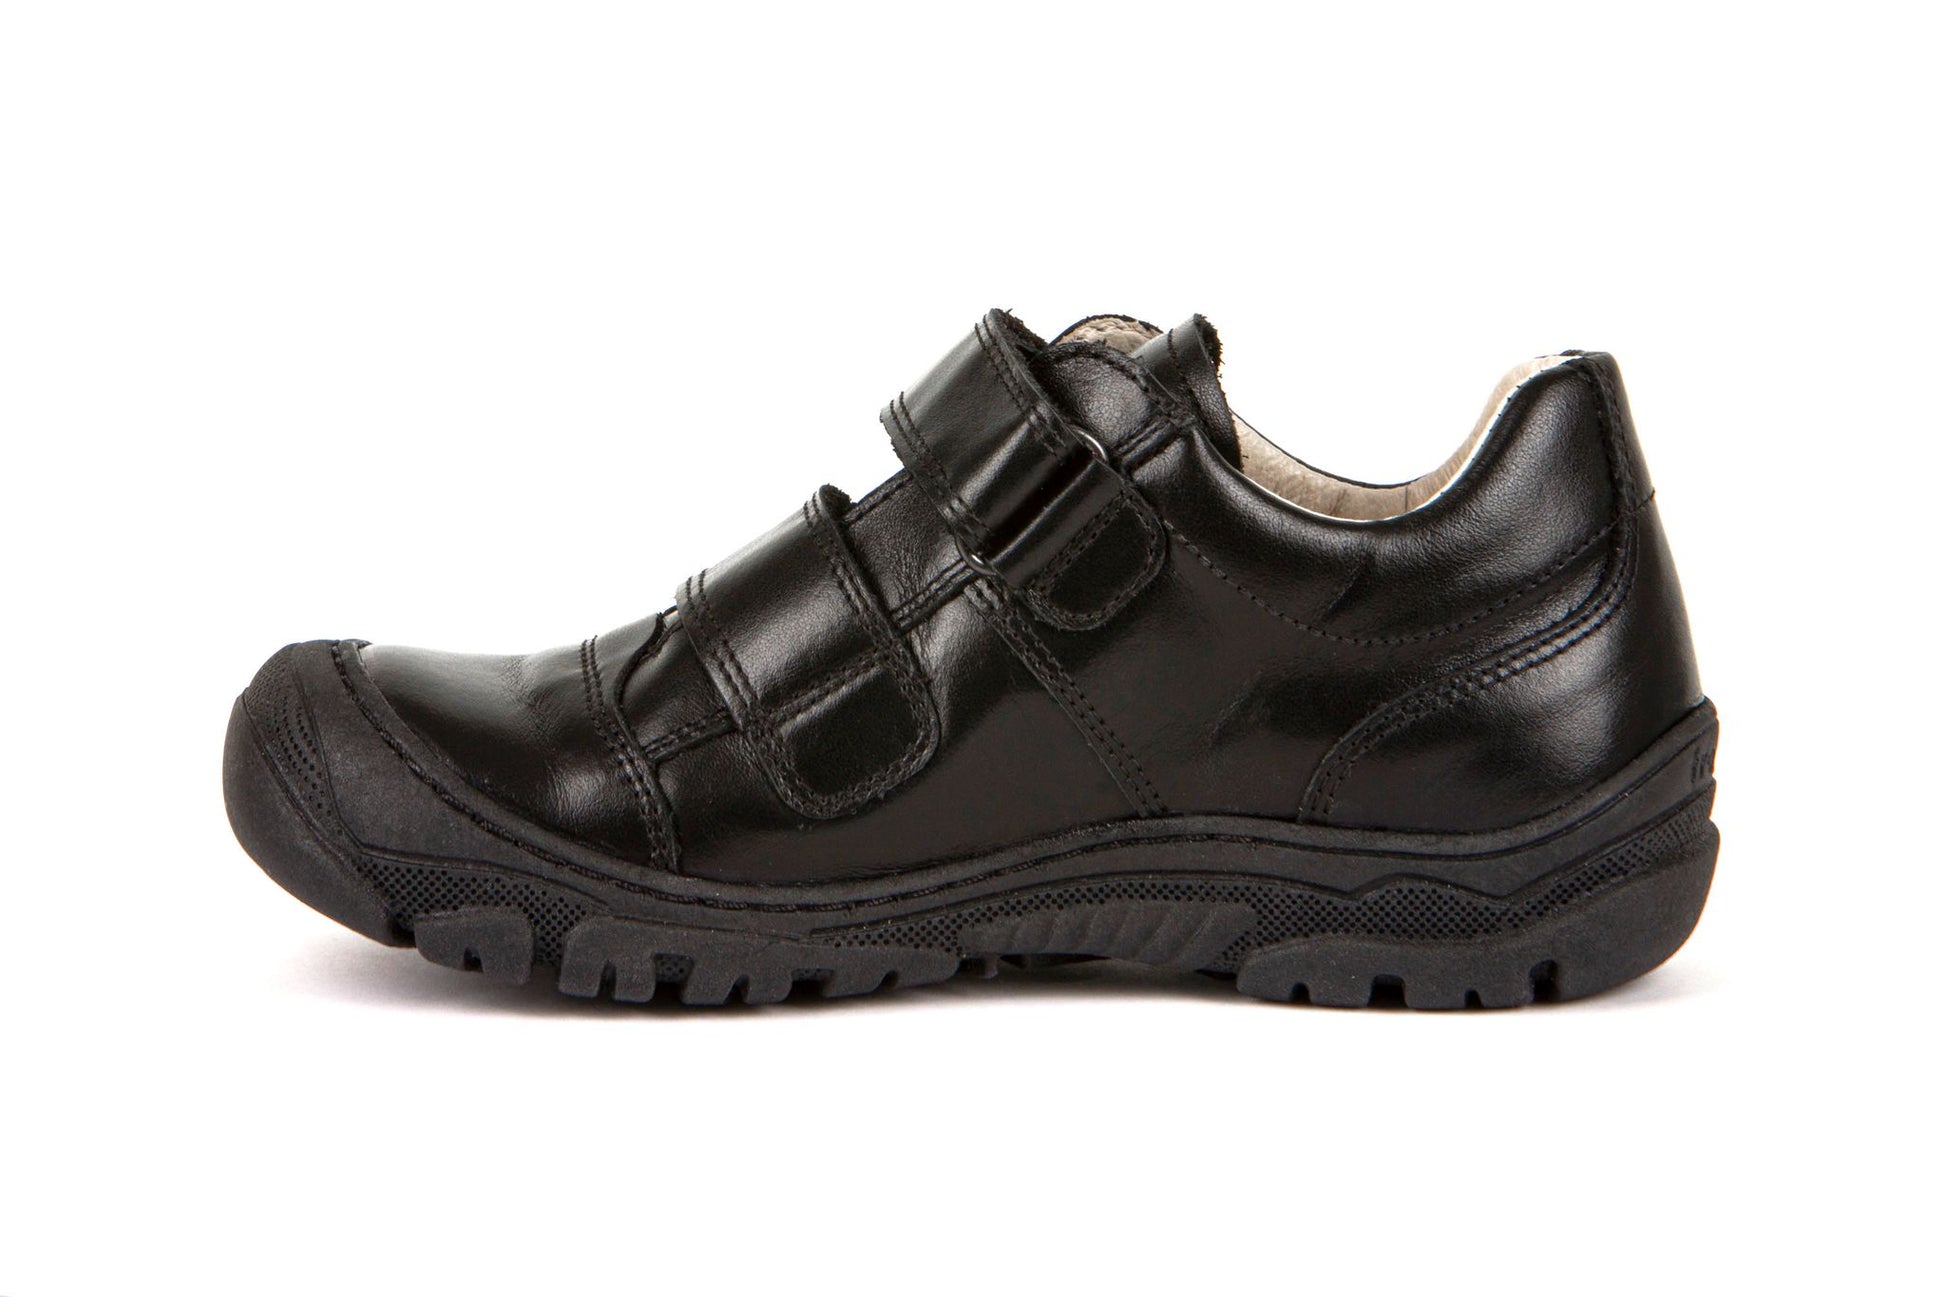 A boys school shoe by Froddo, style G3130188 Leo, in black leather with double velcro fastening. Left side view.